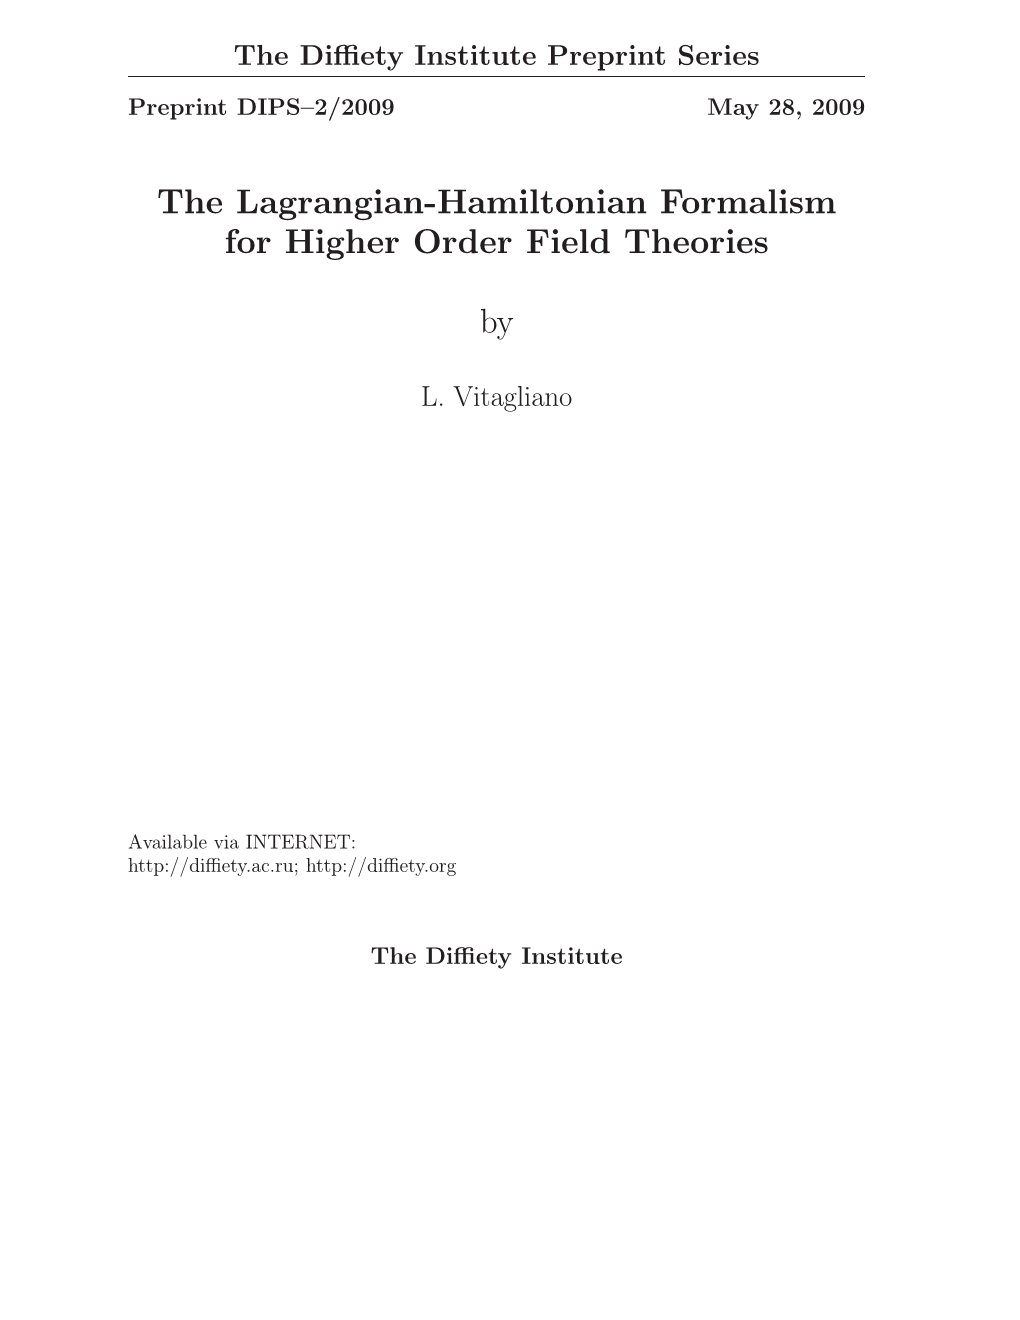 The Lagrangian-Hamiltonian Formalism for Higher Order Field Theories